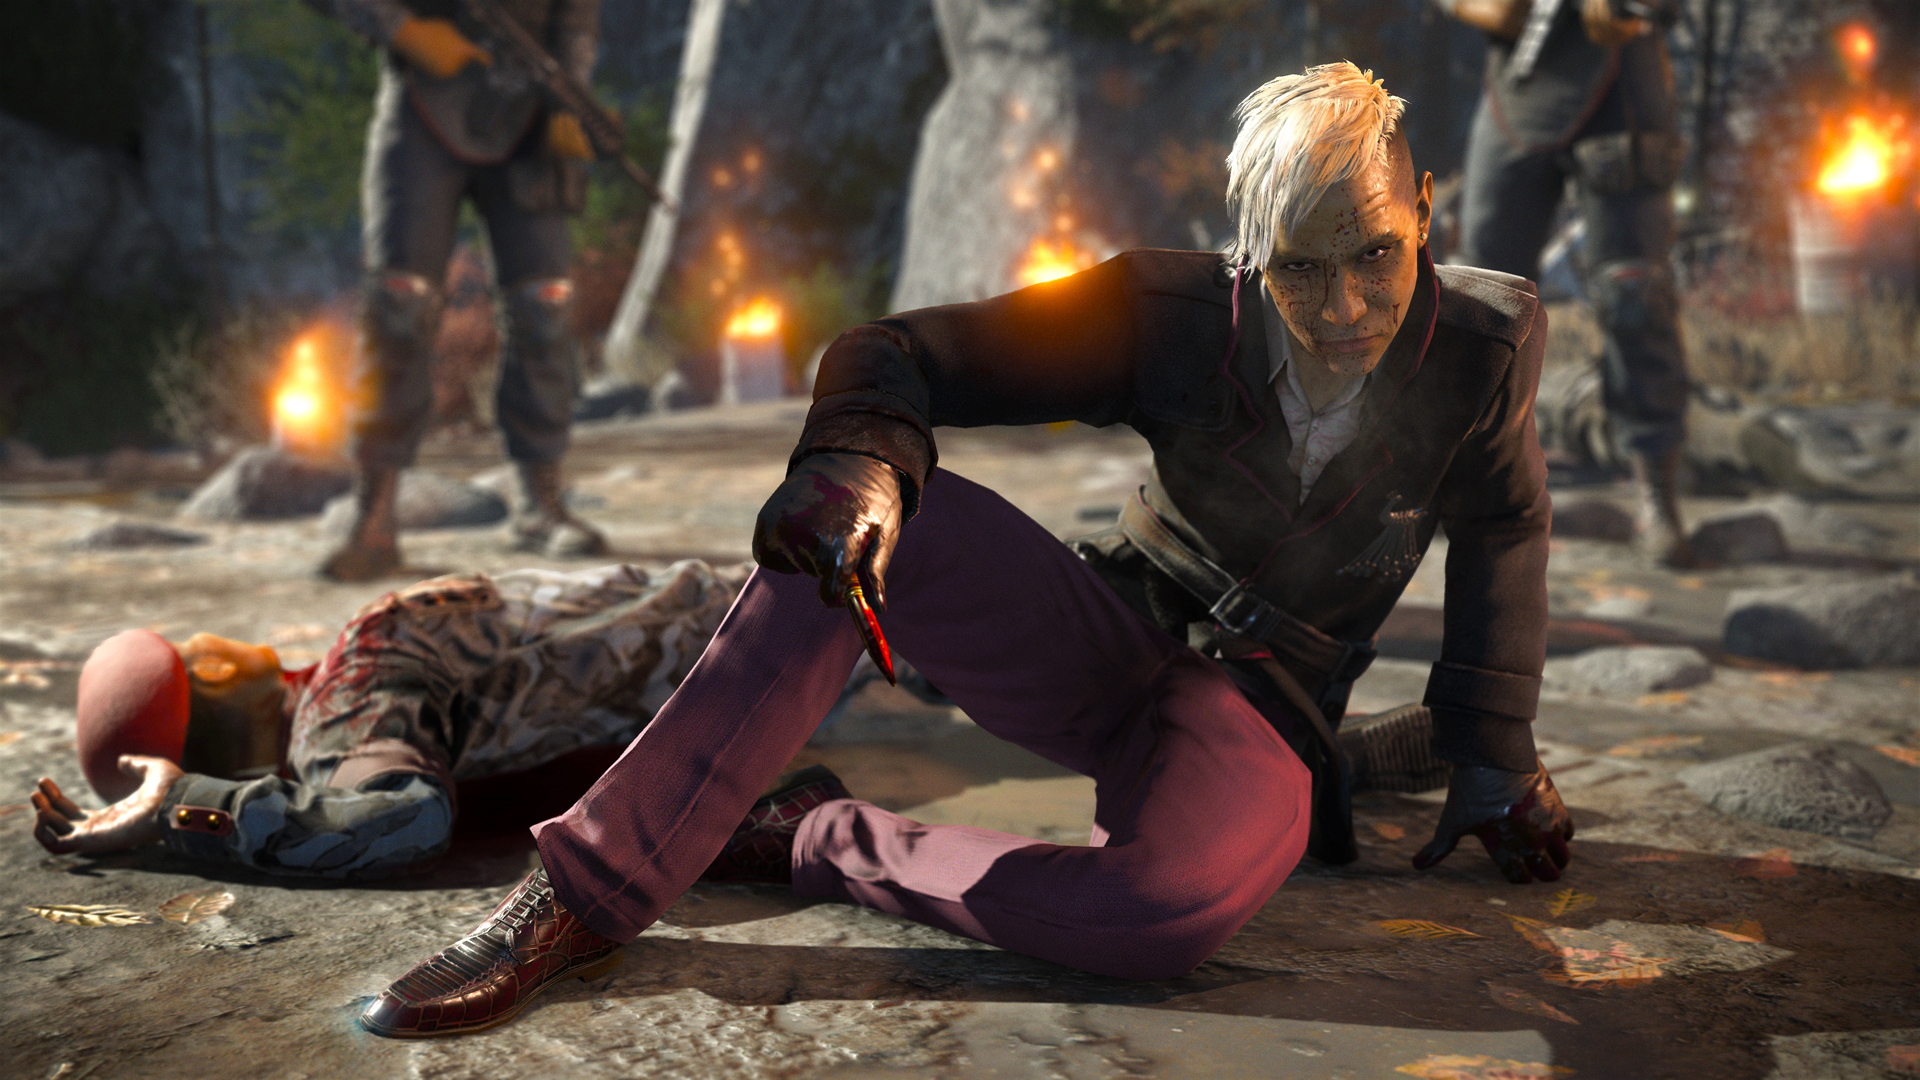 Media asset in full size related to 3dfxzone.it news item entitled as follows: Gameplay trailer e screenshot del first-person shooter Far Cry 4 | Image Name: news21308_Far-Cry-4-screenshot_6.jpg